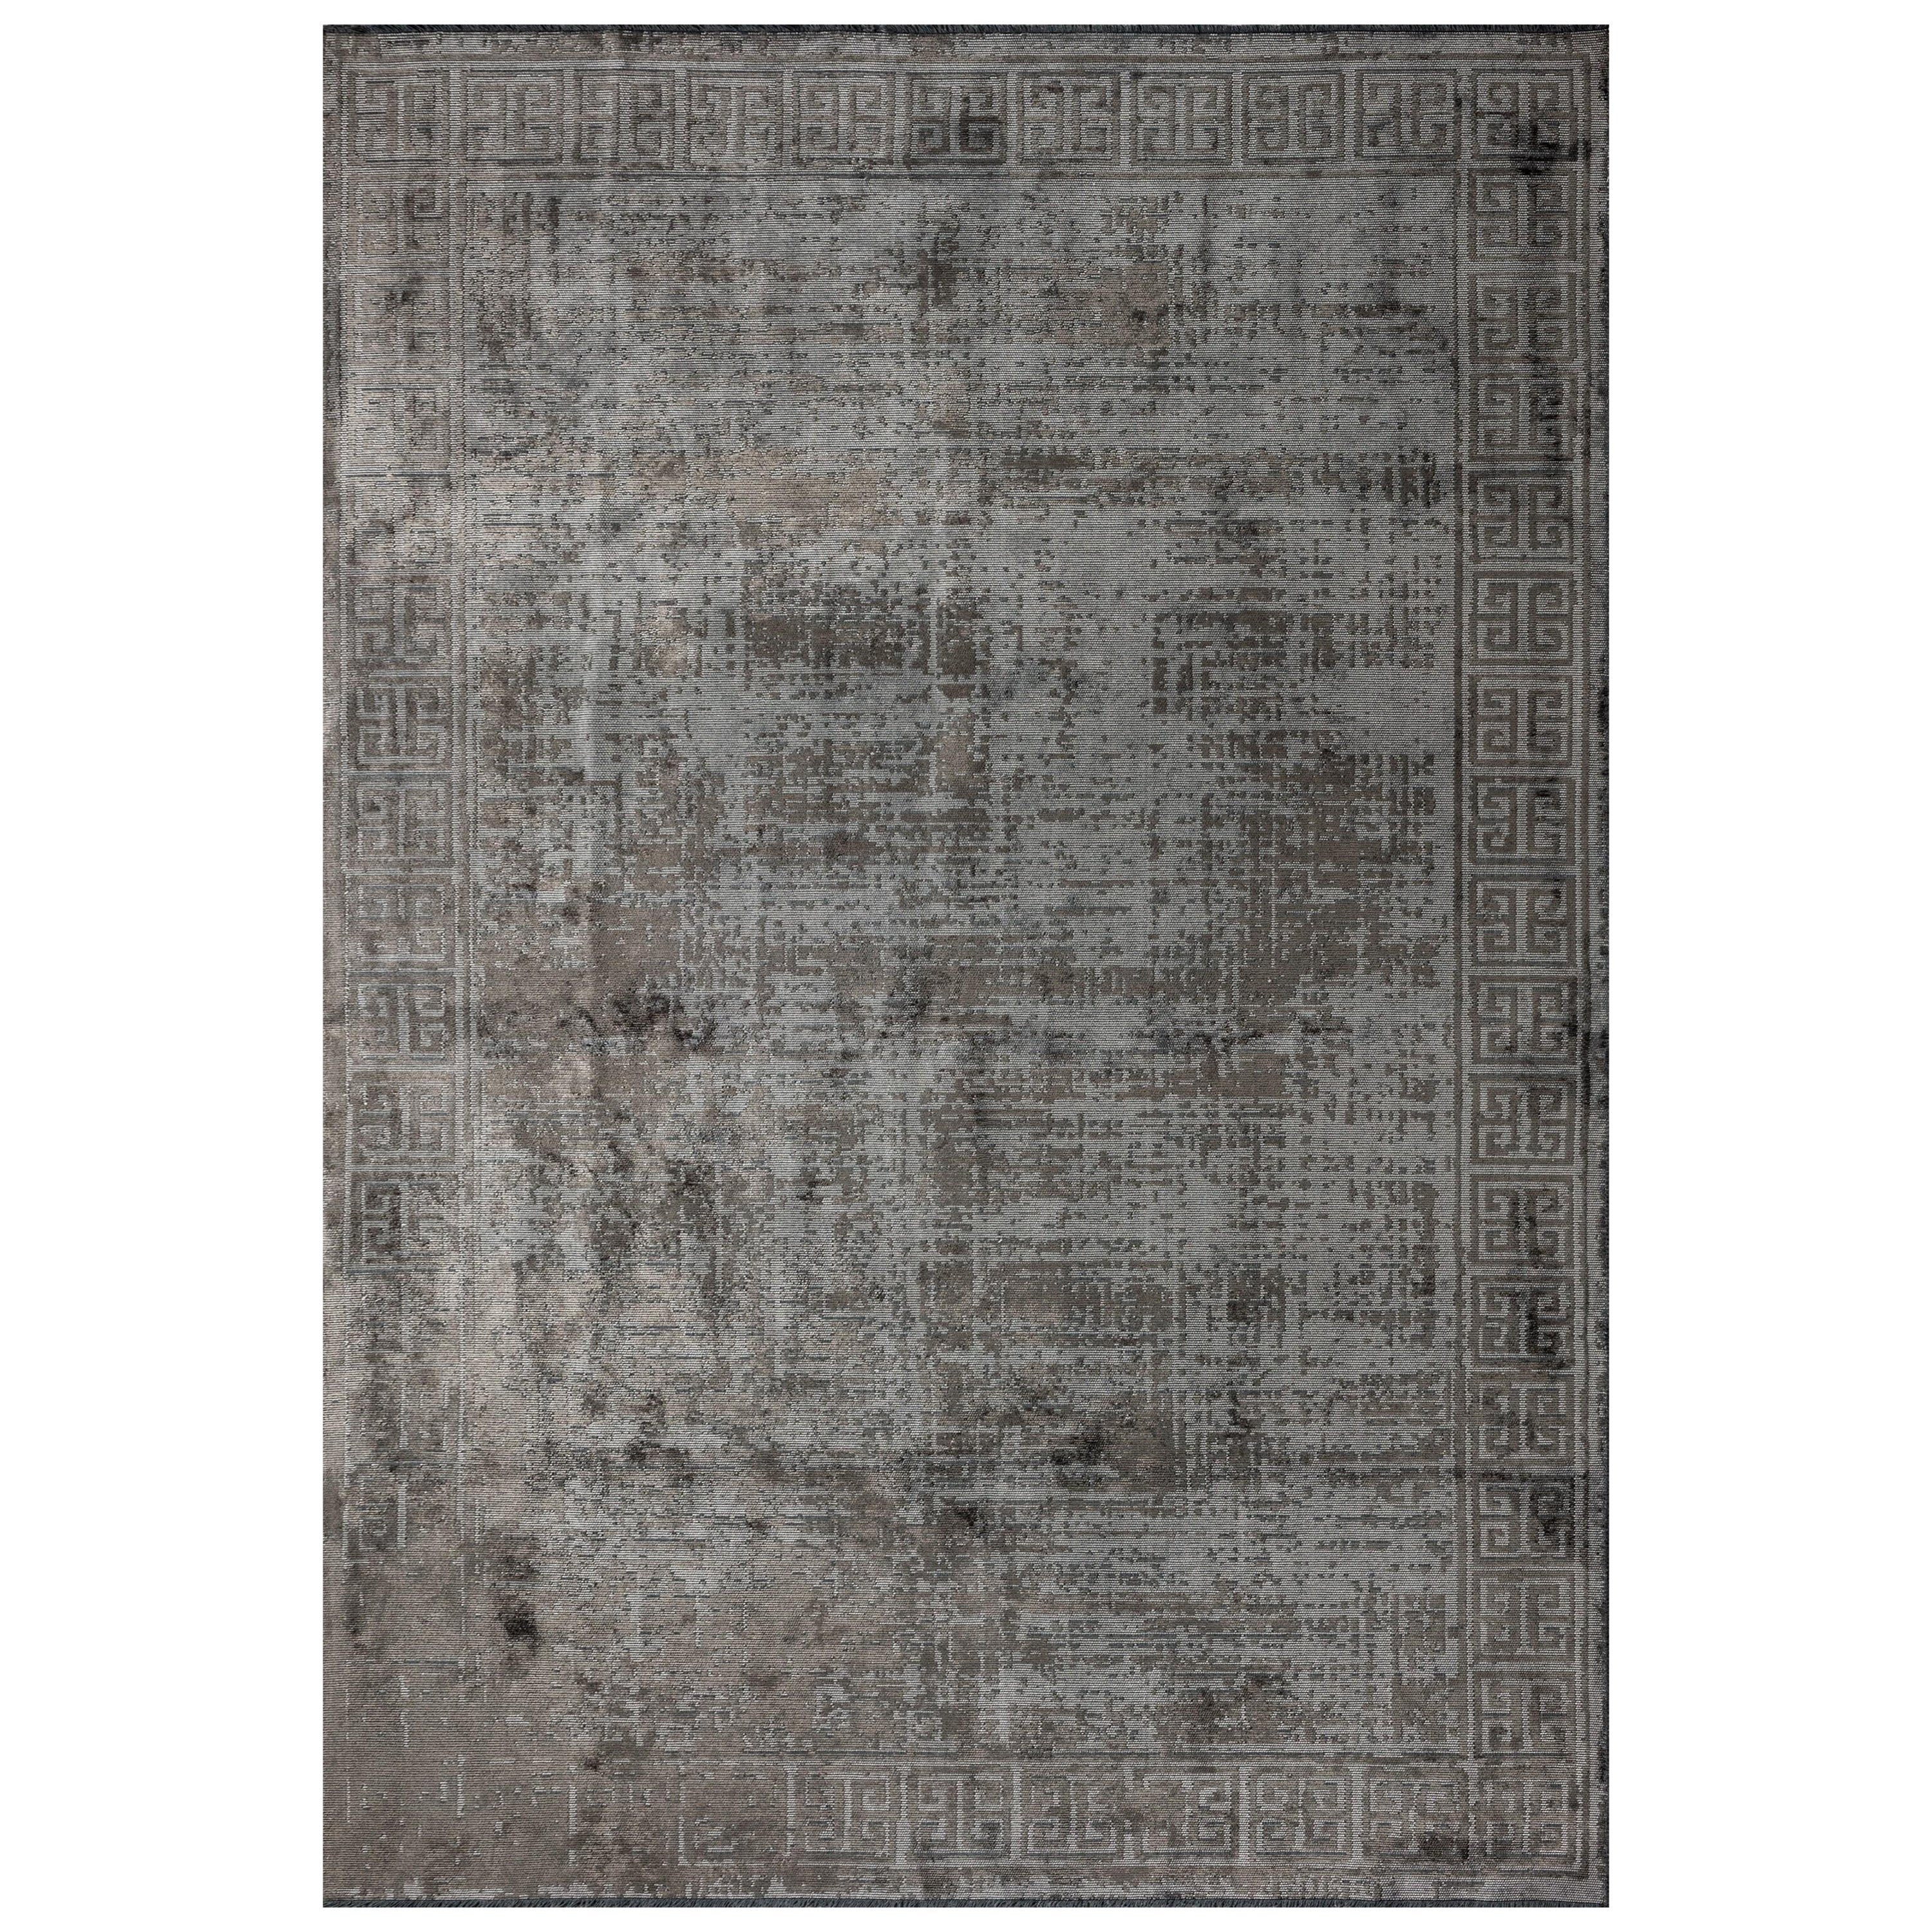 For Sale:  (Gray) Modern Camouflage Luxury Area Rug